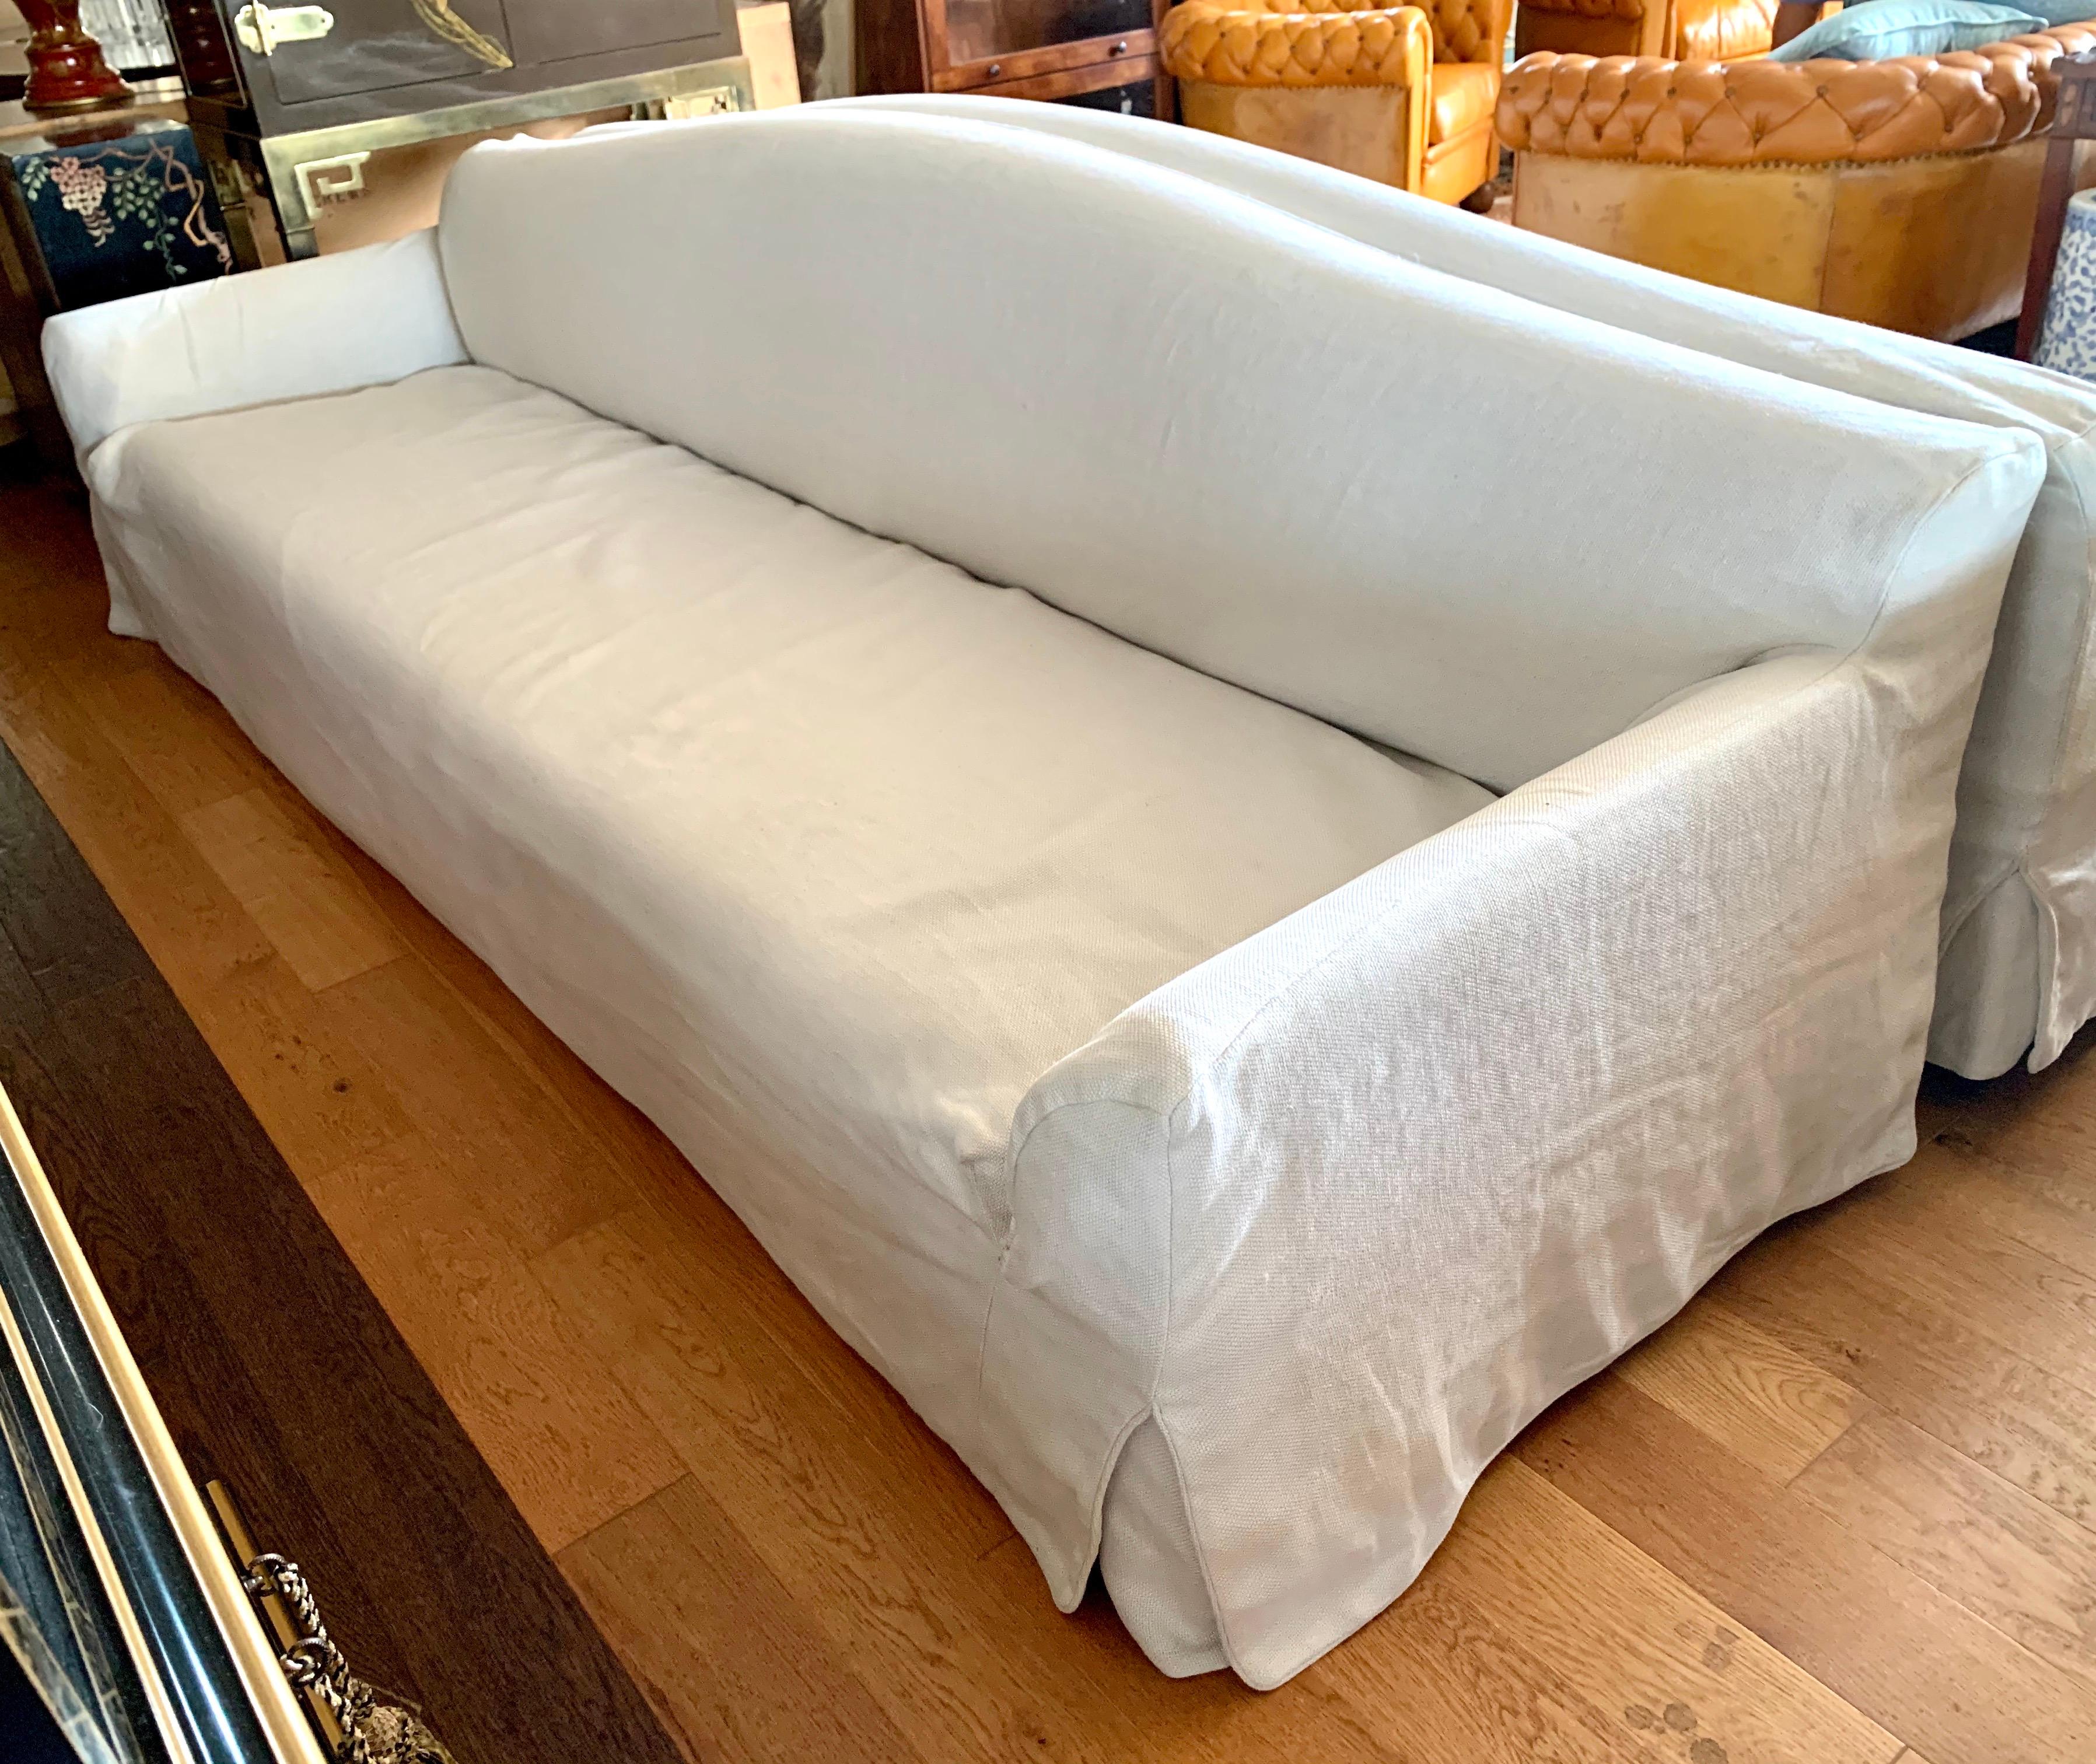 Elegant, large, Christian Liaigre terra linen sofa for Holly Hunt with removable slipcover.  It features a camelback backrest which gives this transitional beauty a classic look.
All manufacturing hallmarks present underneath.